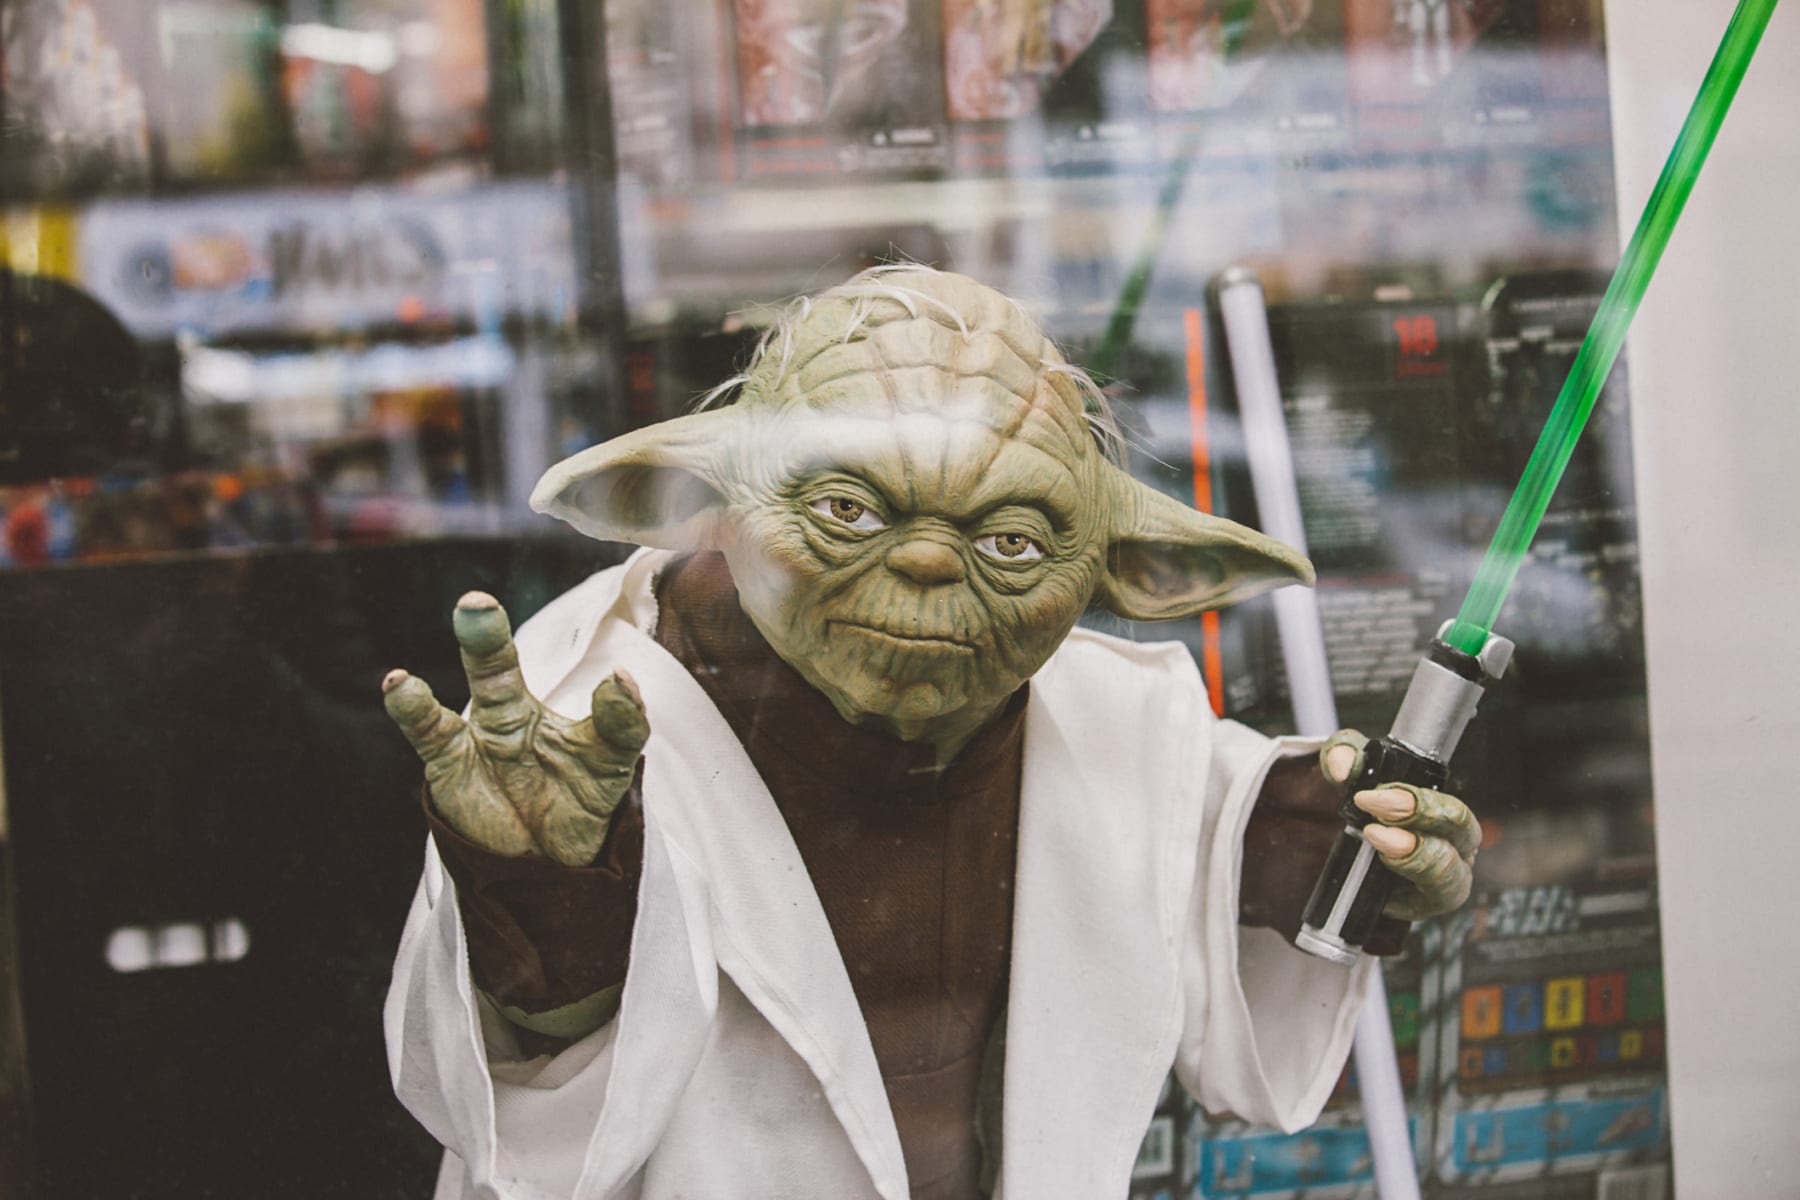 Toy model of Star Wars character Yoda featured in window display.